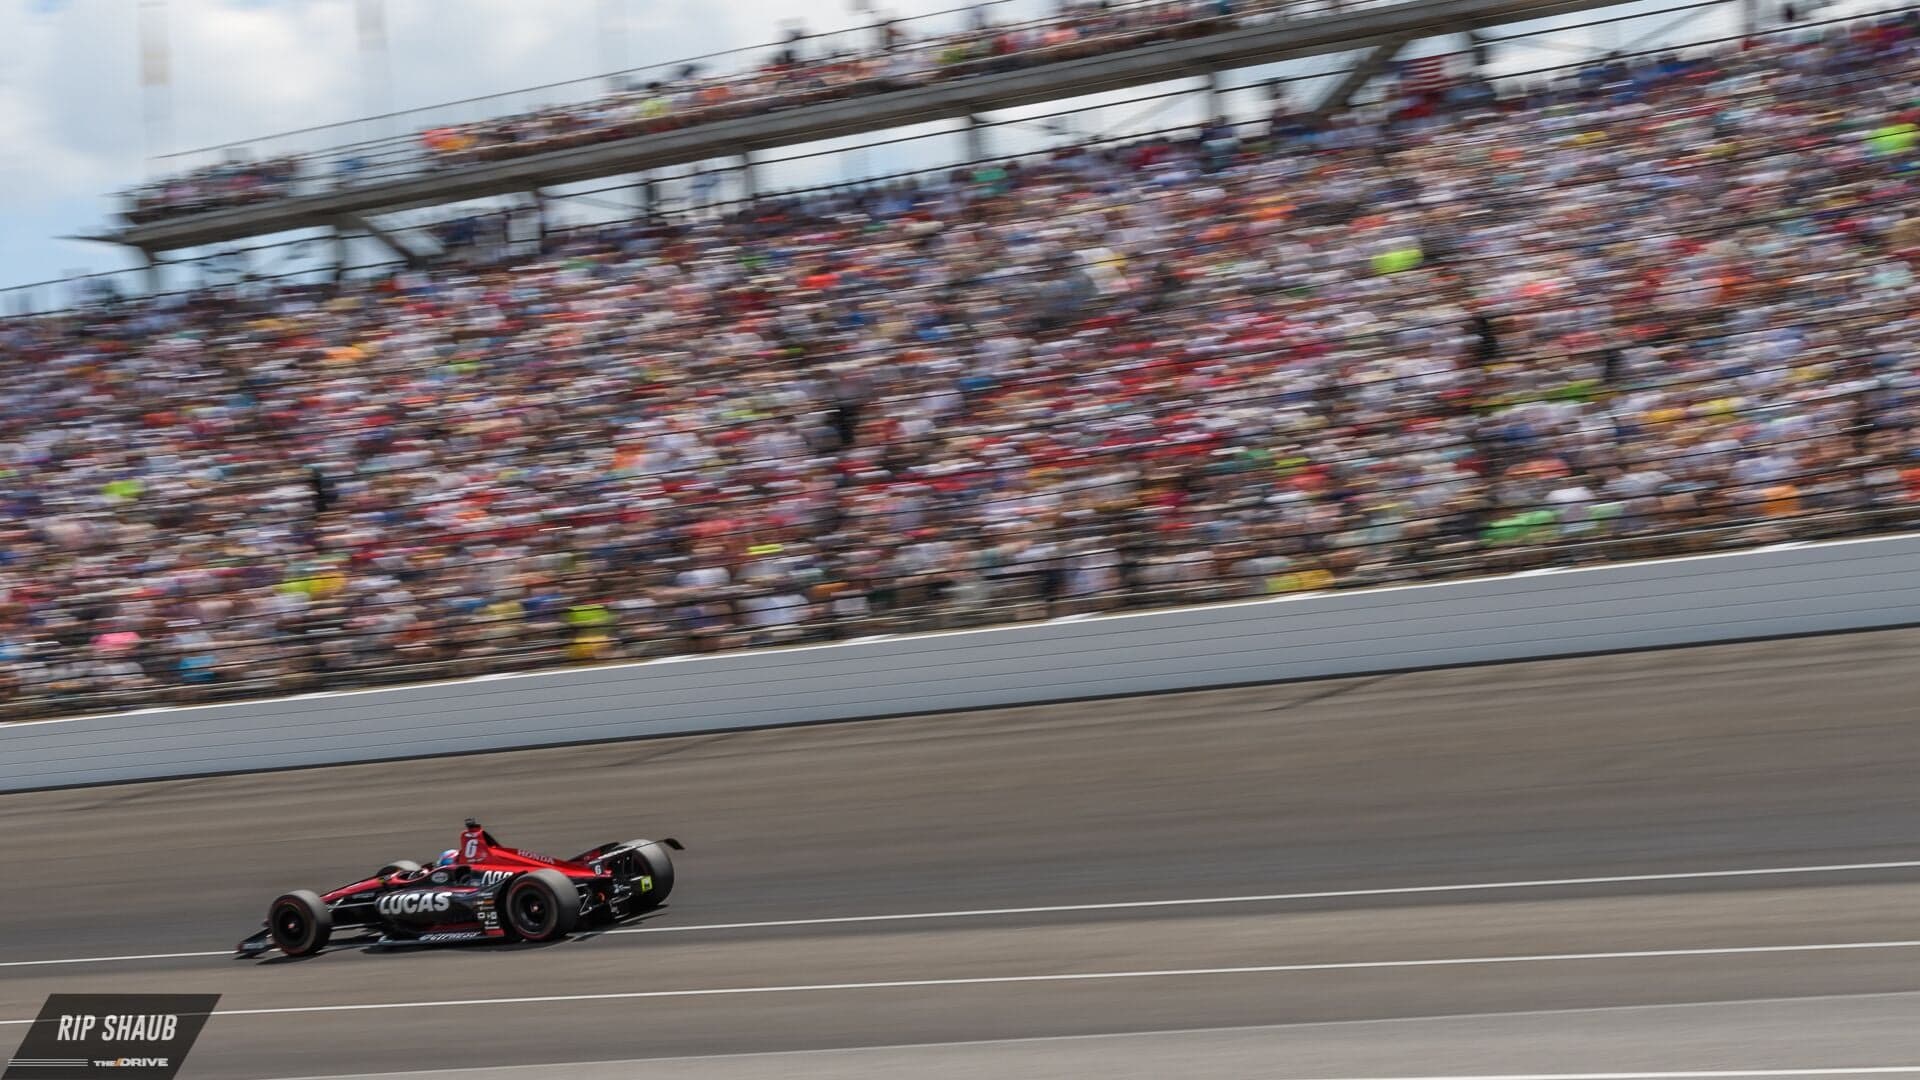 Report: Indianapolis 500 Voted the Greatest Auto Race in the World